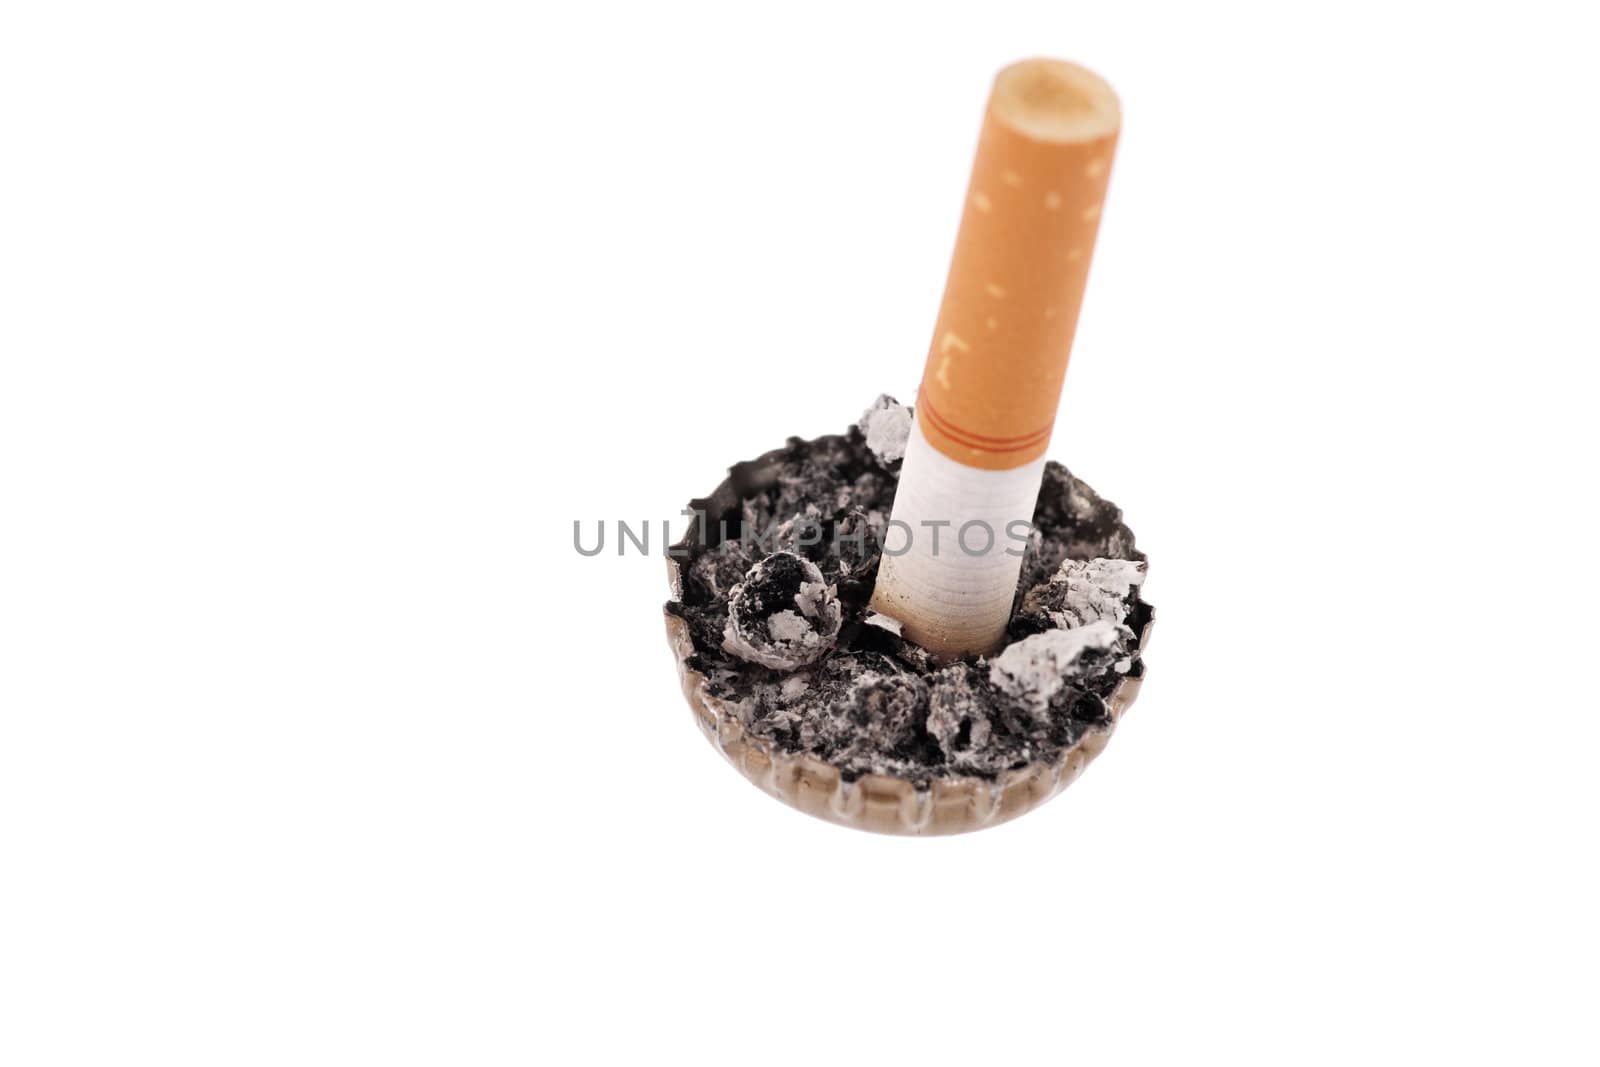 Quit smoking, cigarette butt in a bottle cap on white background